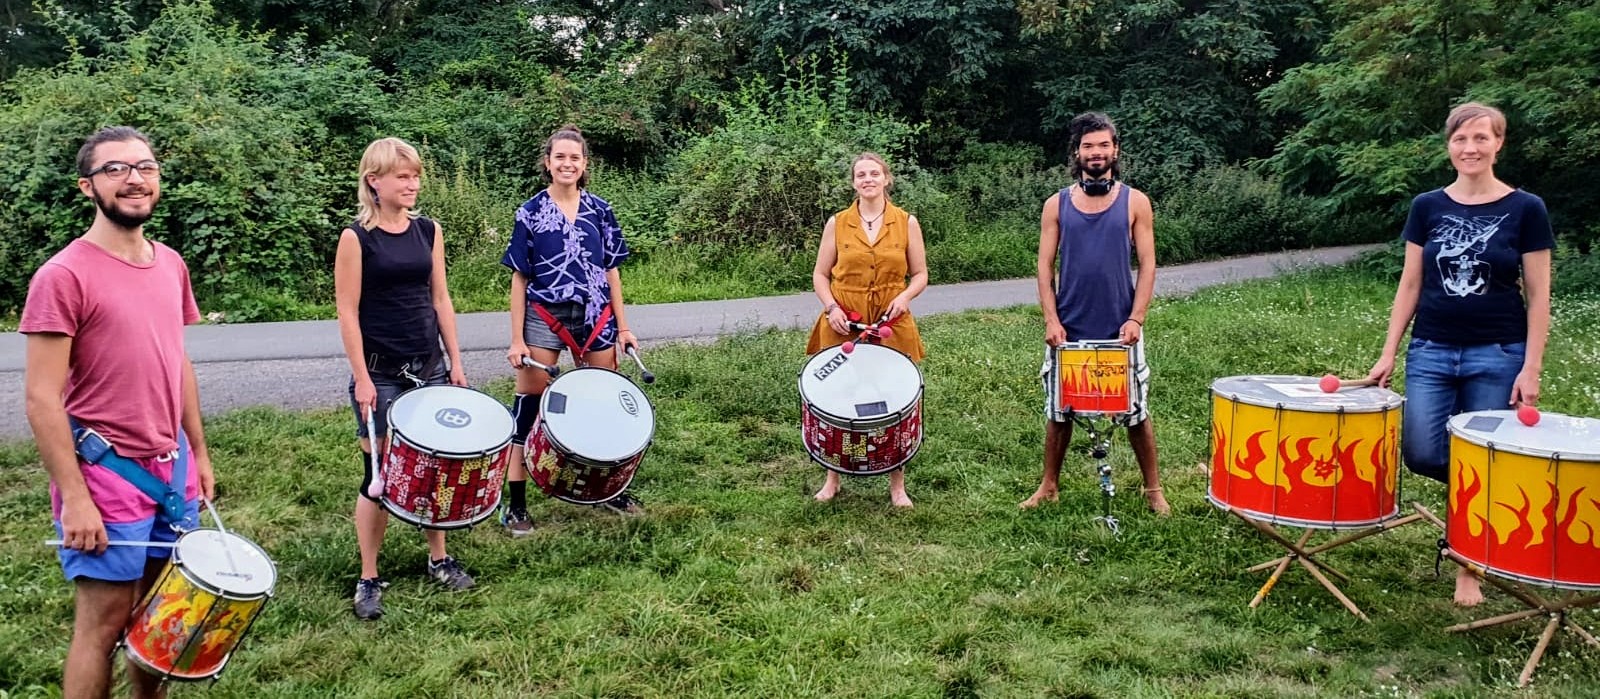 group of six percussionists with their instruments looking at the camera standing in the grass